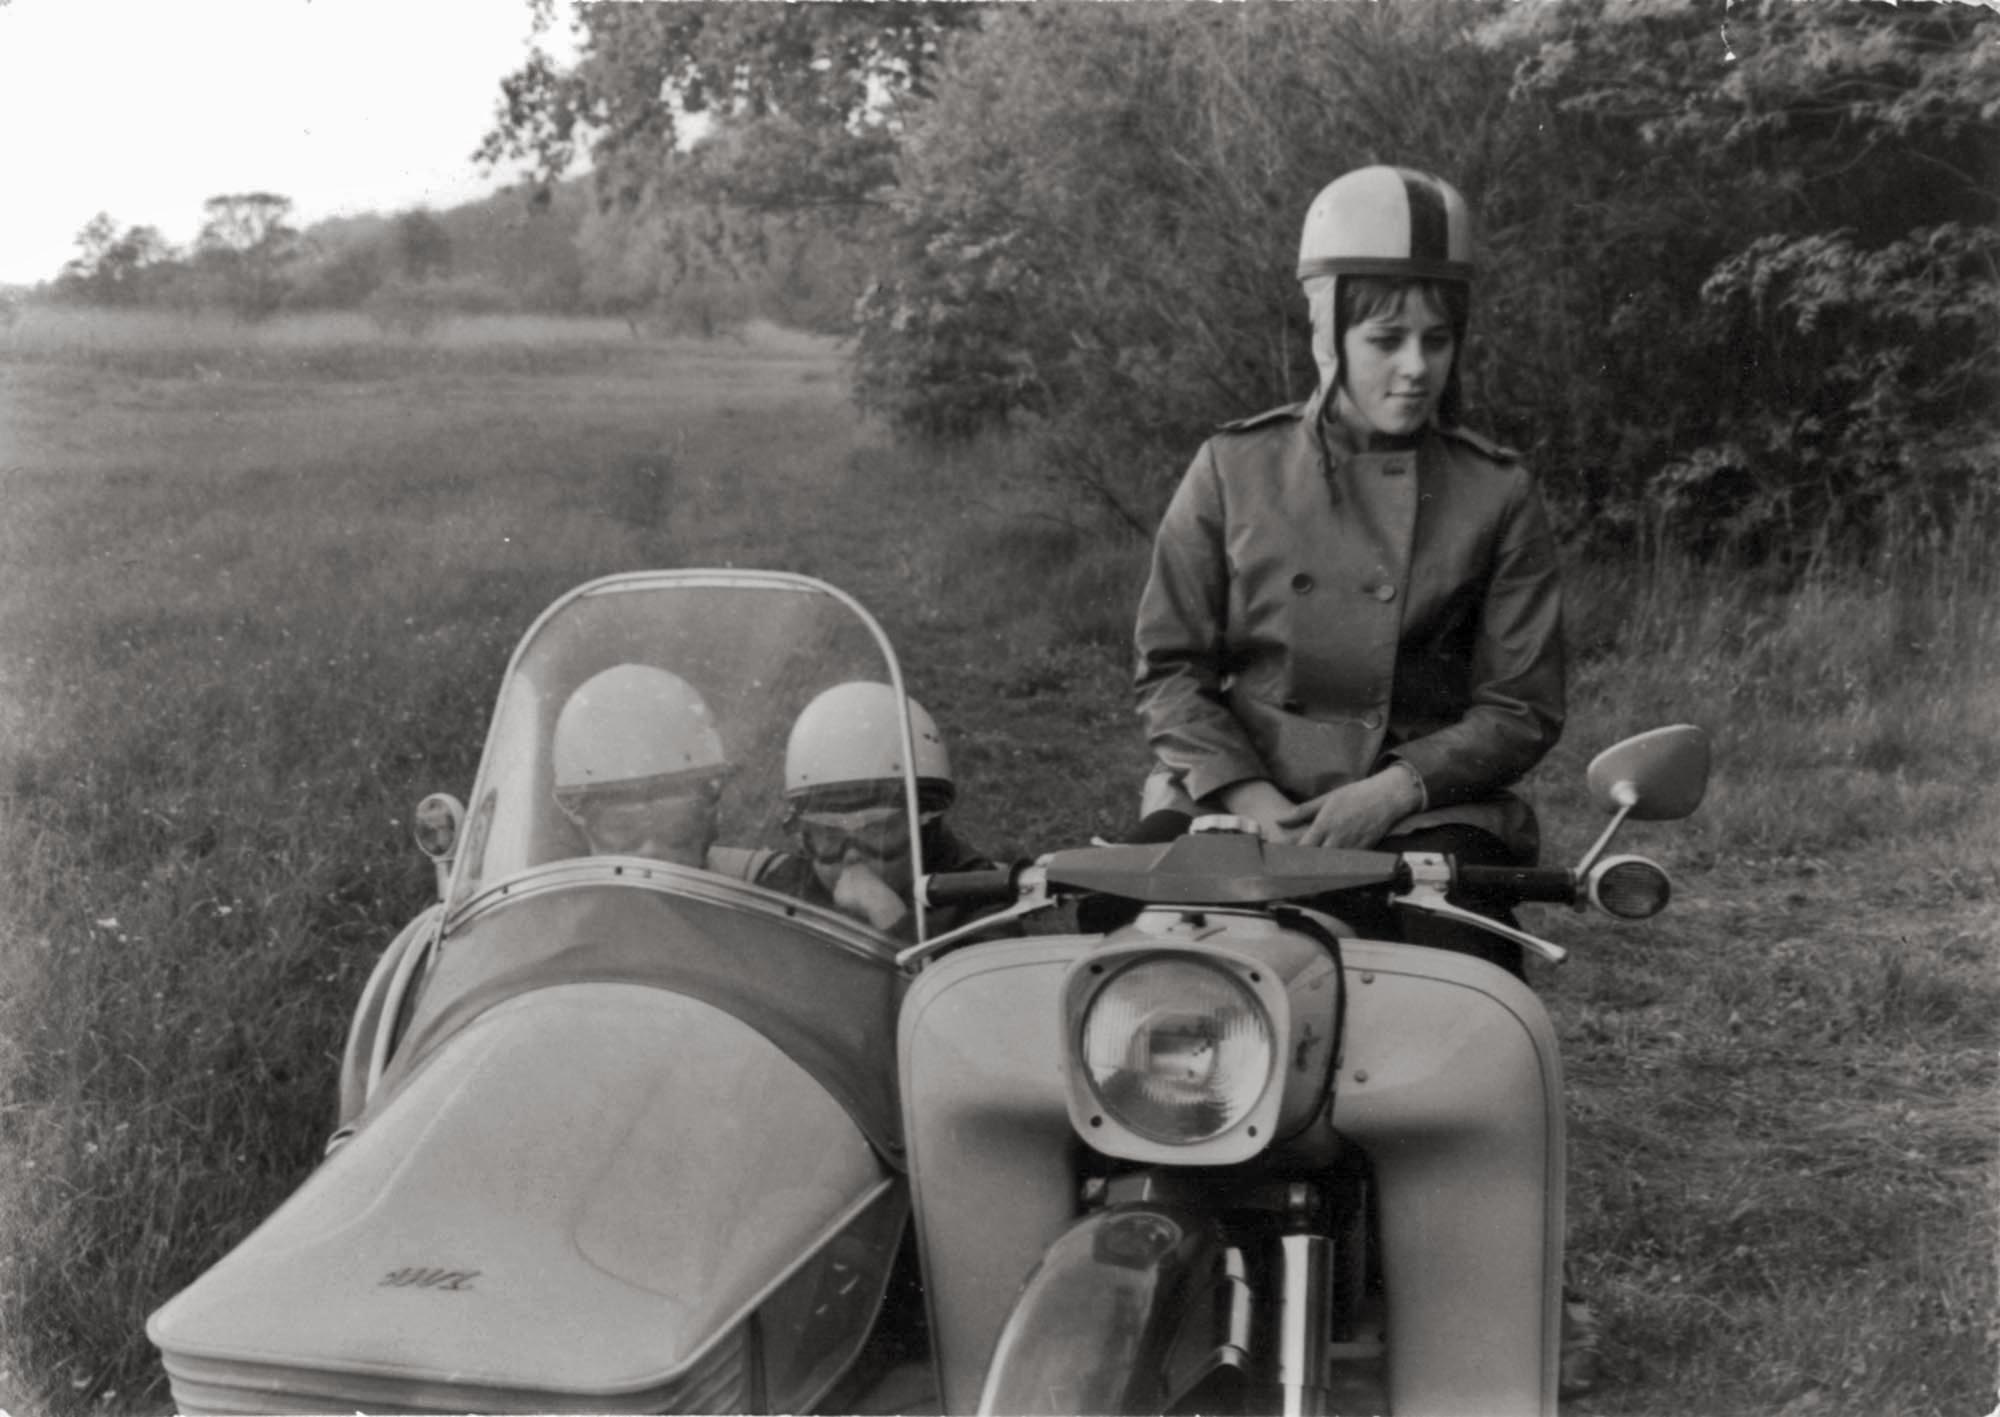 An old photograph from East Germany (exact date is unknown) of a MZ ES 250/2 motorcycle with Superelastik sidecar. Dad is presumably the one taking the picture of this mother and children.